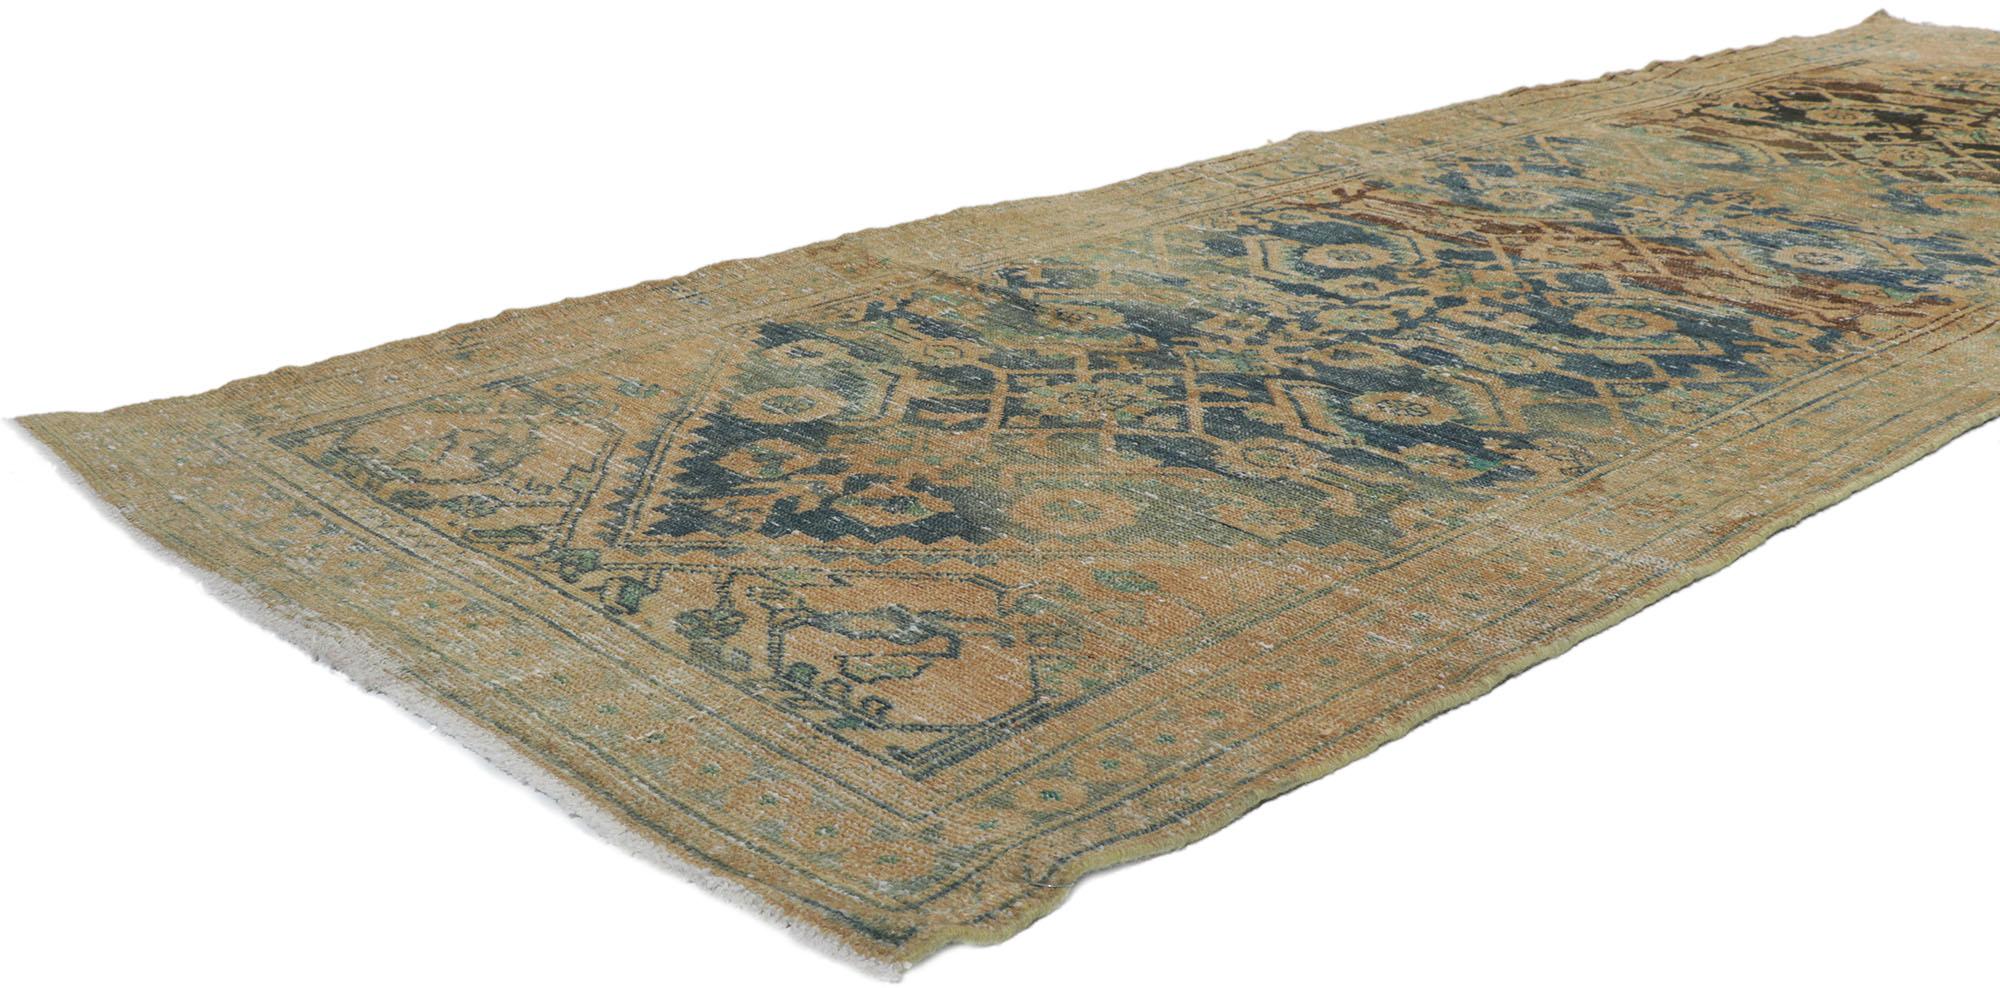 60984 Distressed antique Persian Malayer Runner with Herati Pattern 03'06 x 10'02. Emanating sophistication and grace with blue hues, this hand knotted wool distressed antique Persian Malayer runner will take on a curated lived-in look that feels